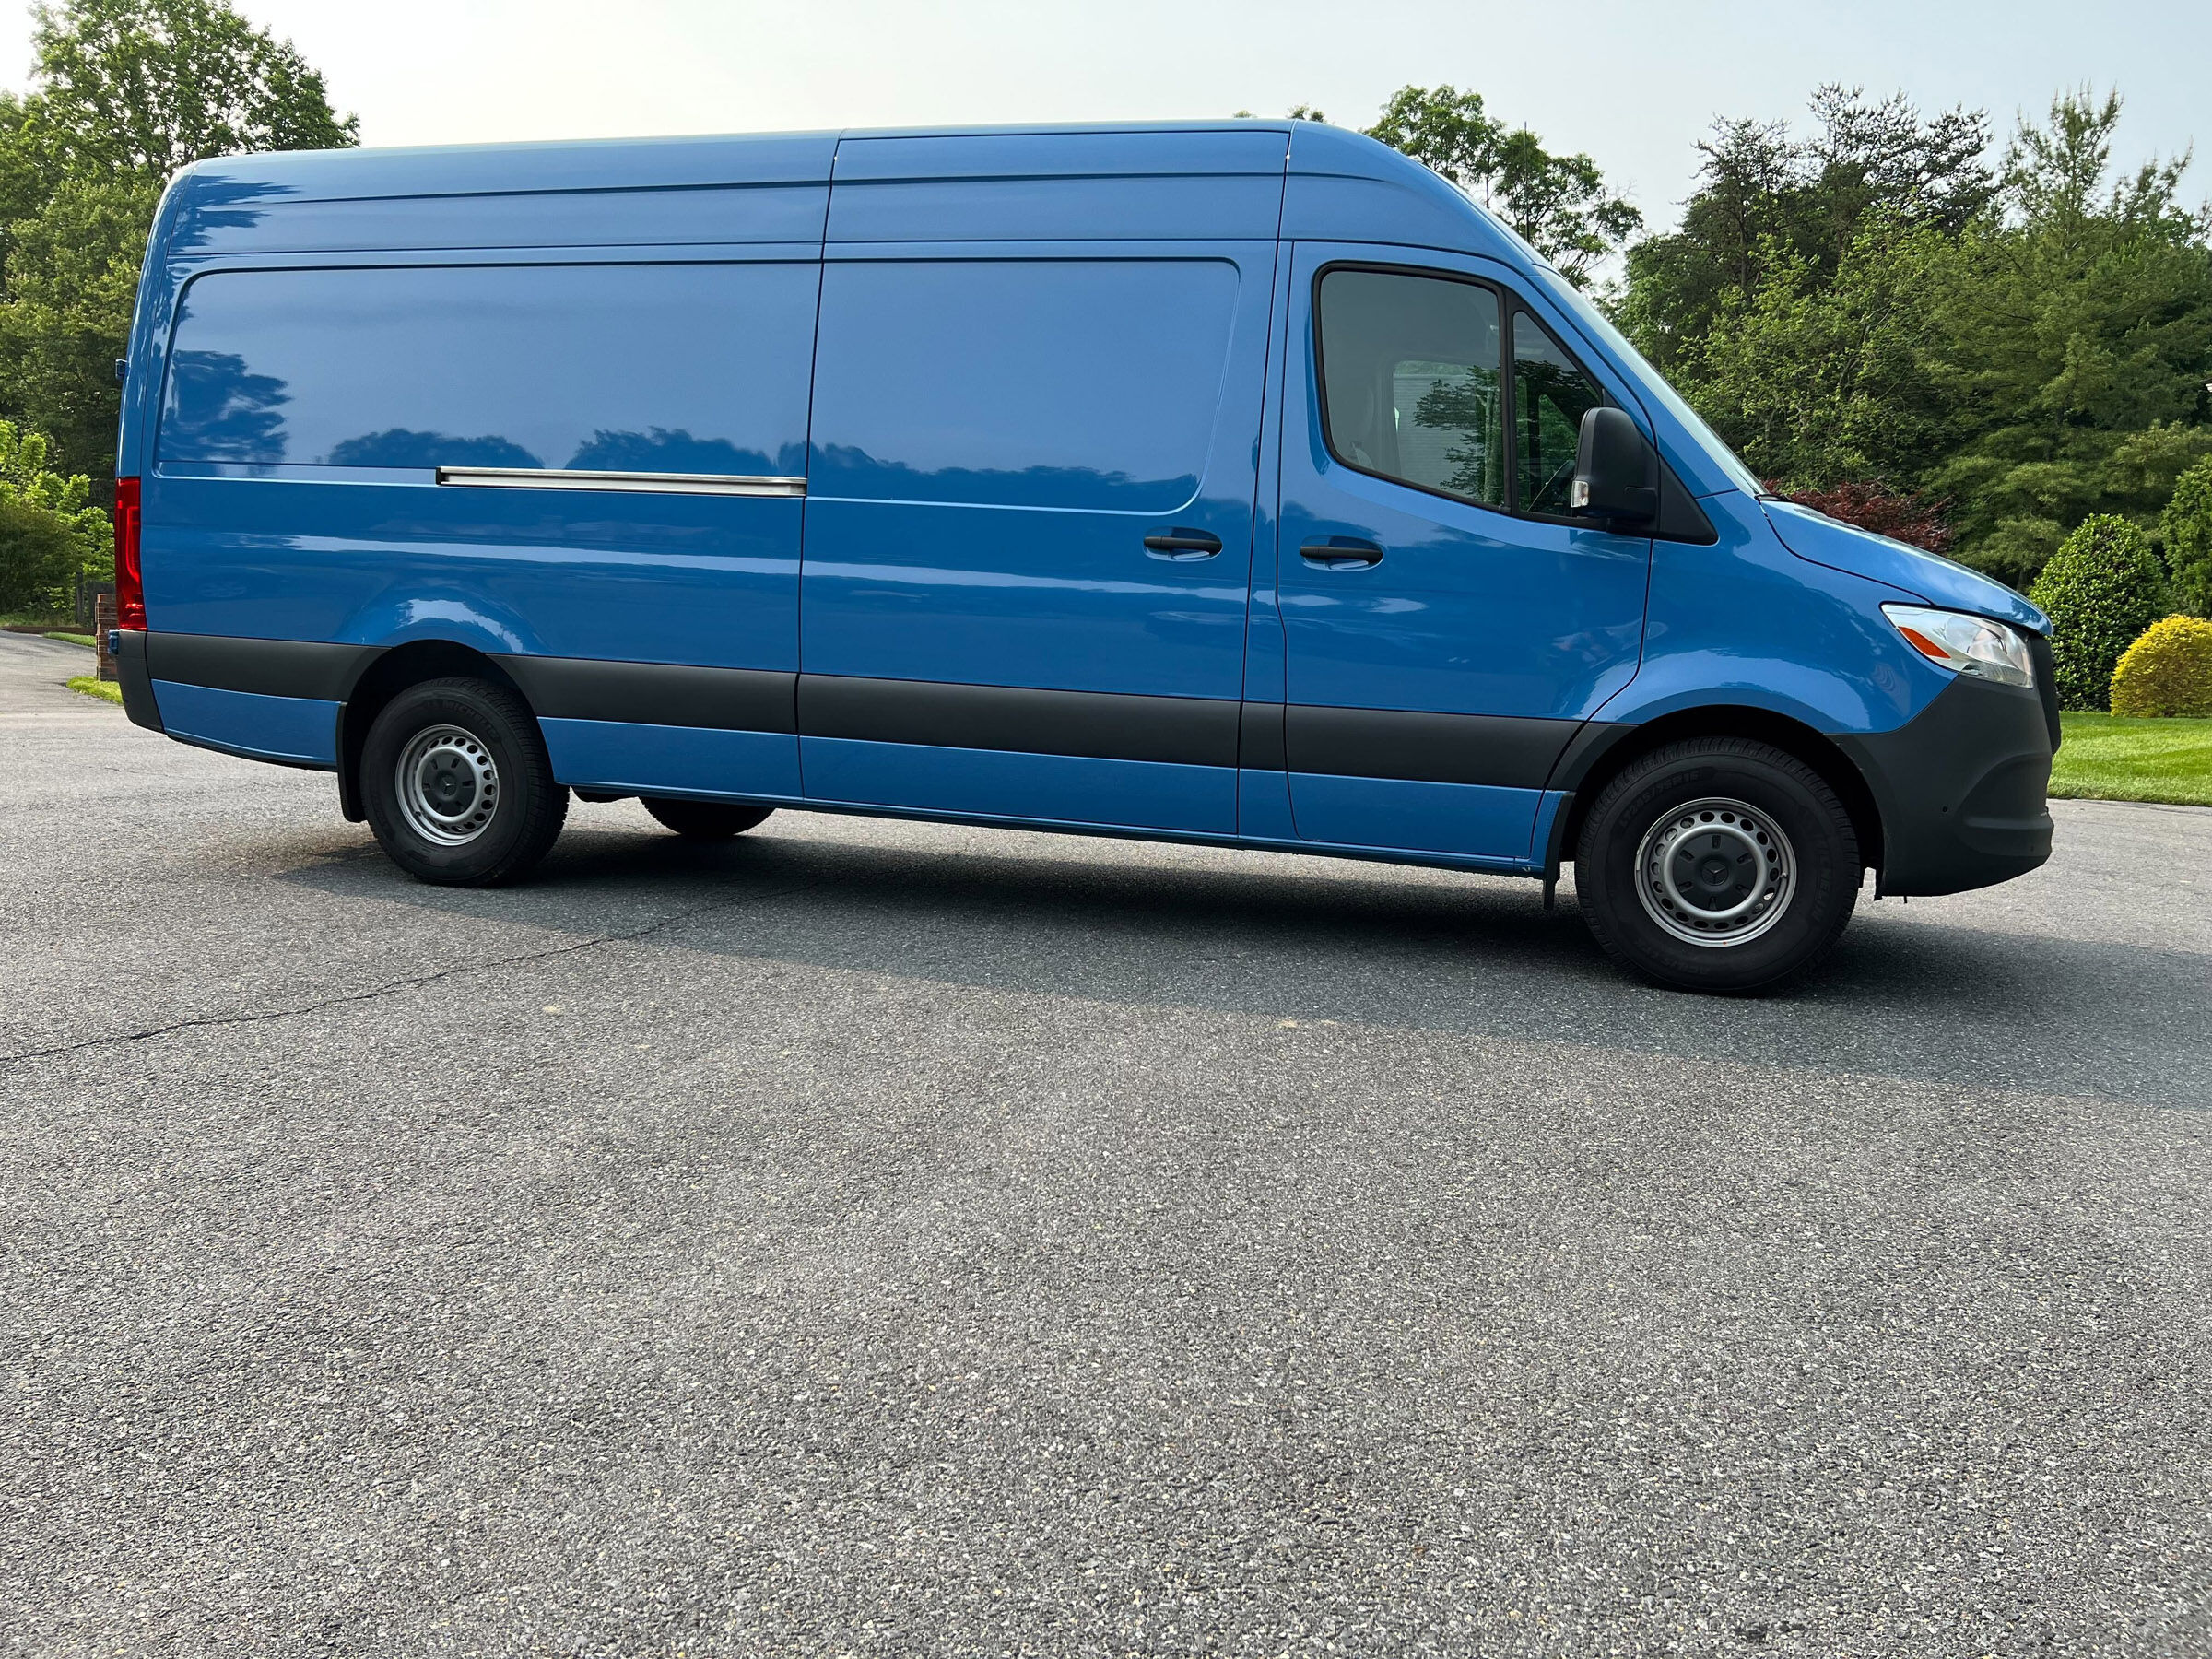 Car Review: Mercedes Sprinter 2500 cargo van can move a house in one trip -  WTOP News